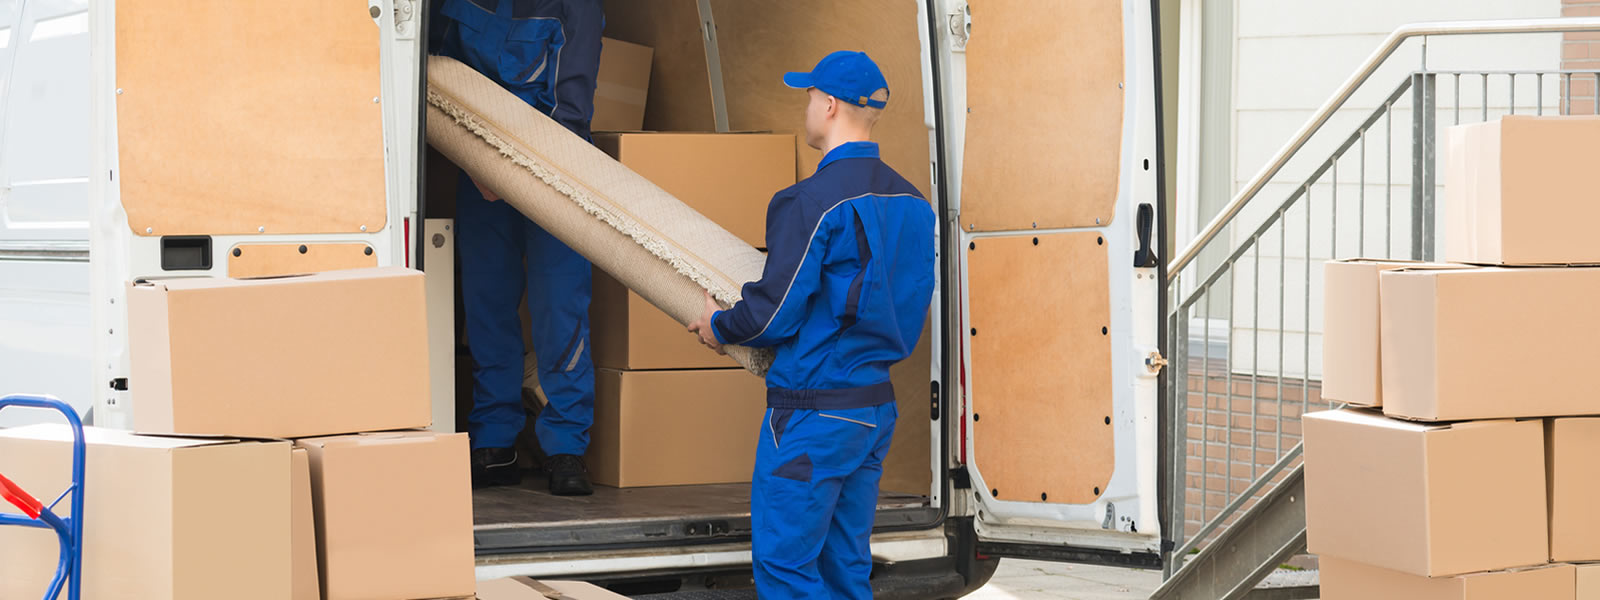 A man assisting with company relocation by loading boxes into a moving truck.